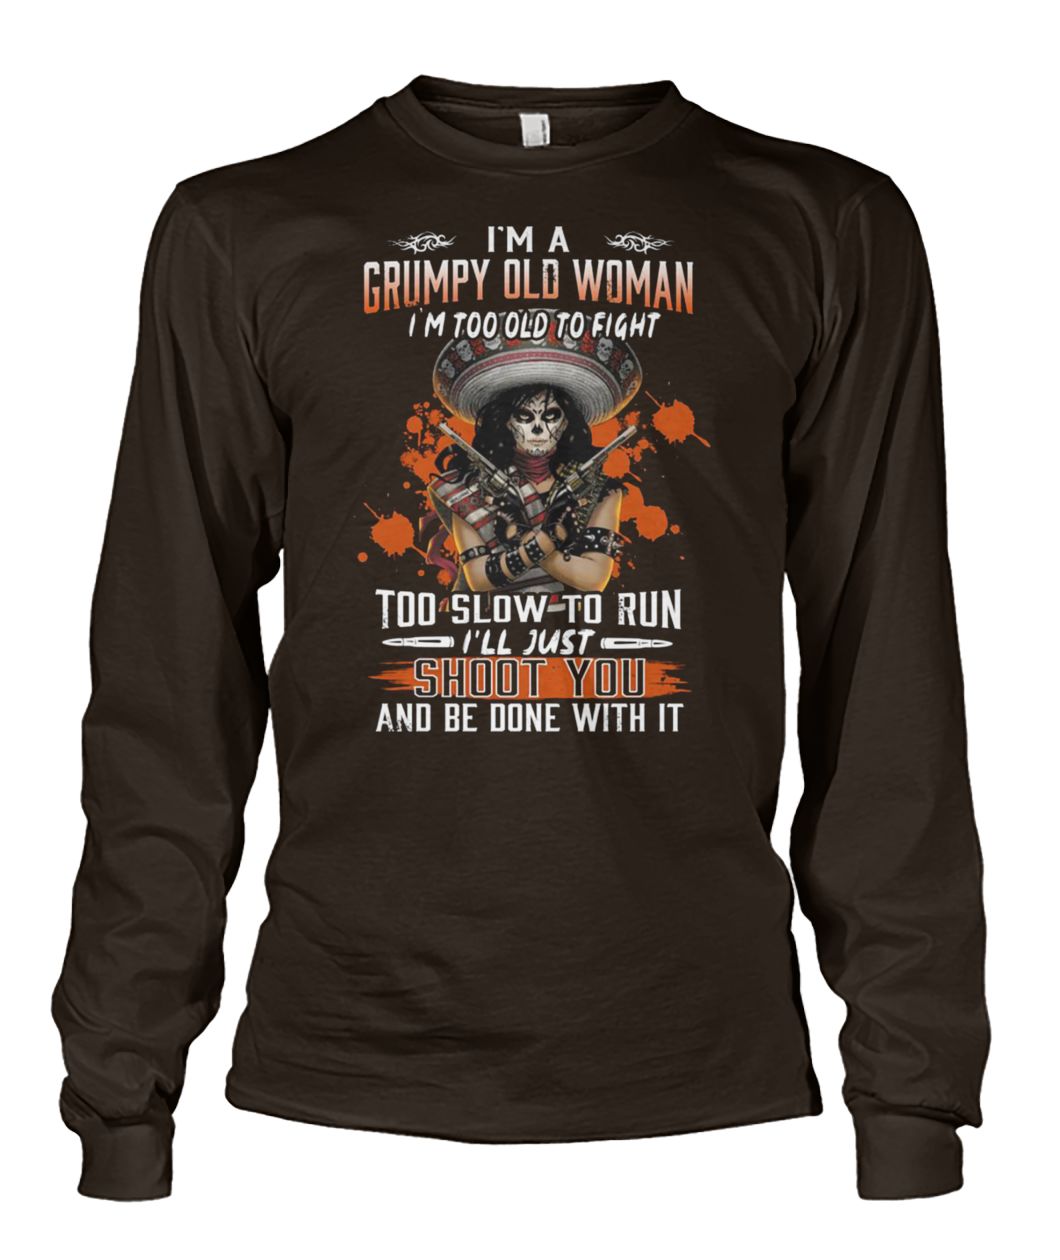 I'm a grumpy old woman I'm too old to fight too slow to run I'll just shoot you and be done with it unisex long sleeve